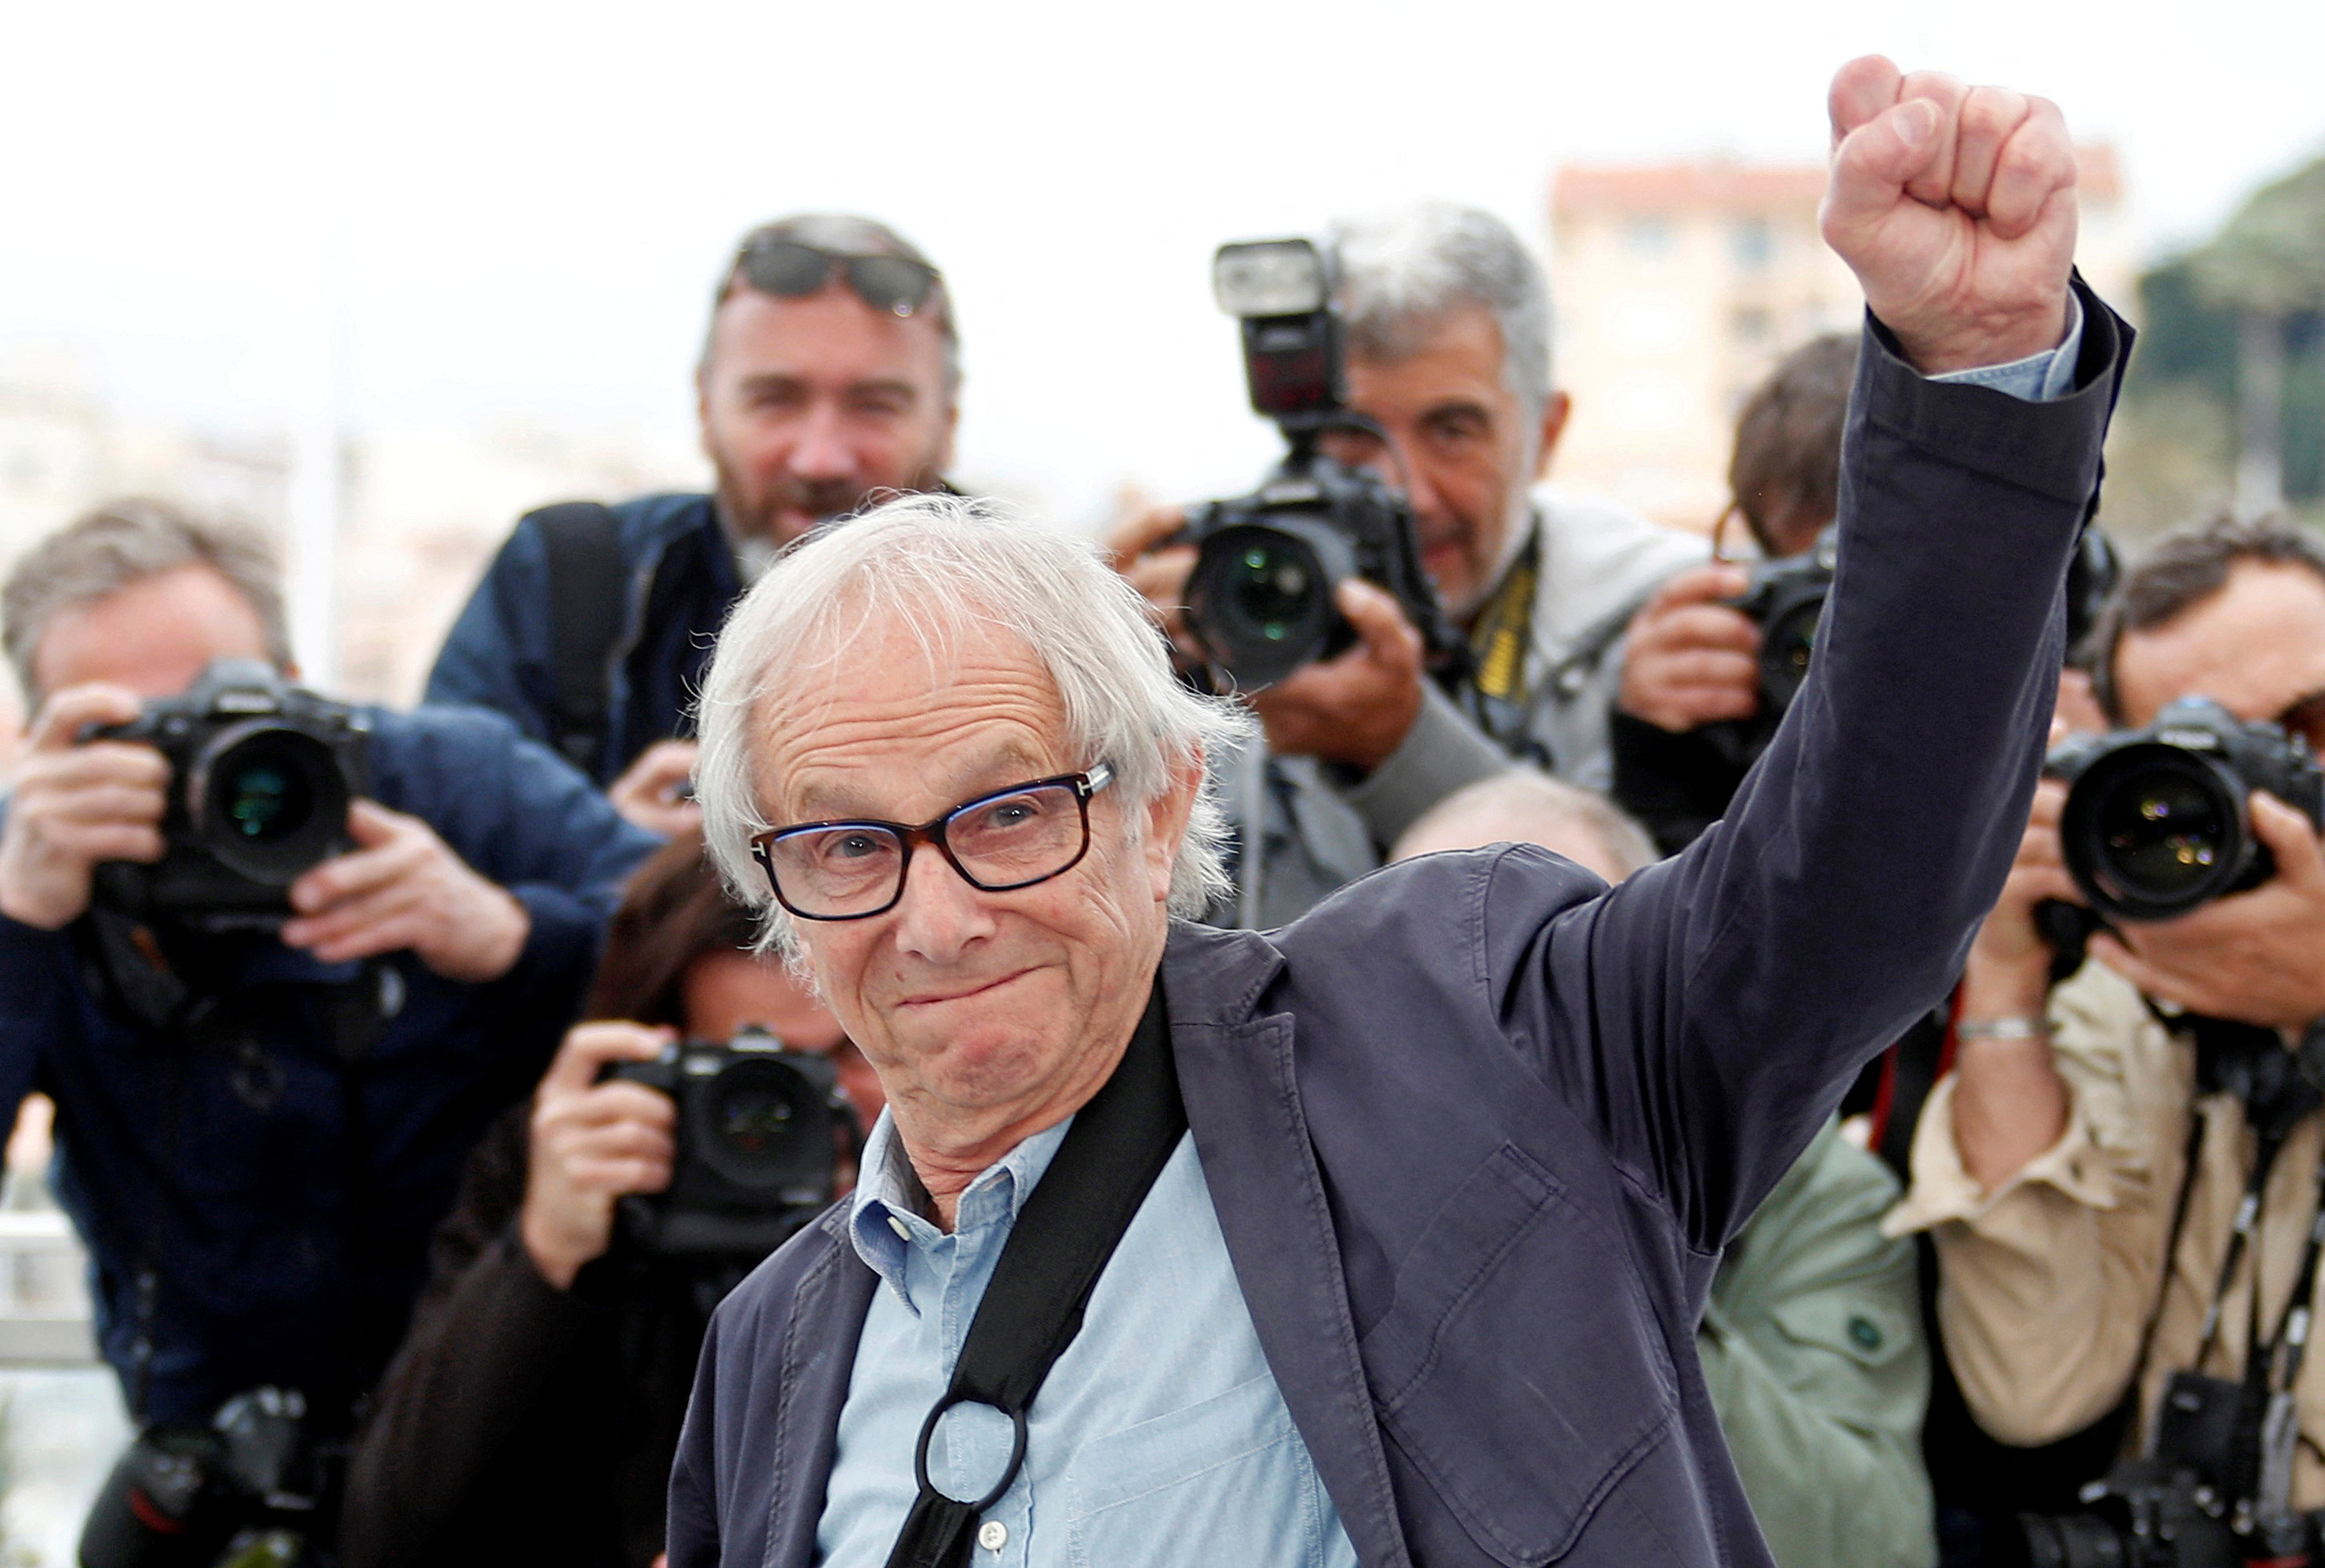 Wes Anderson, Ken Loach among big names competing at Cannes Film Festival |  Reuters